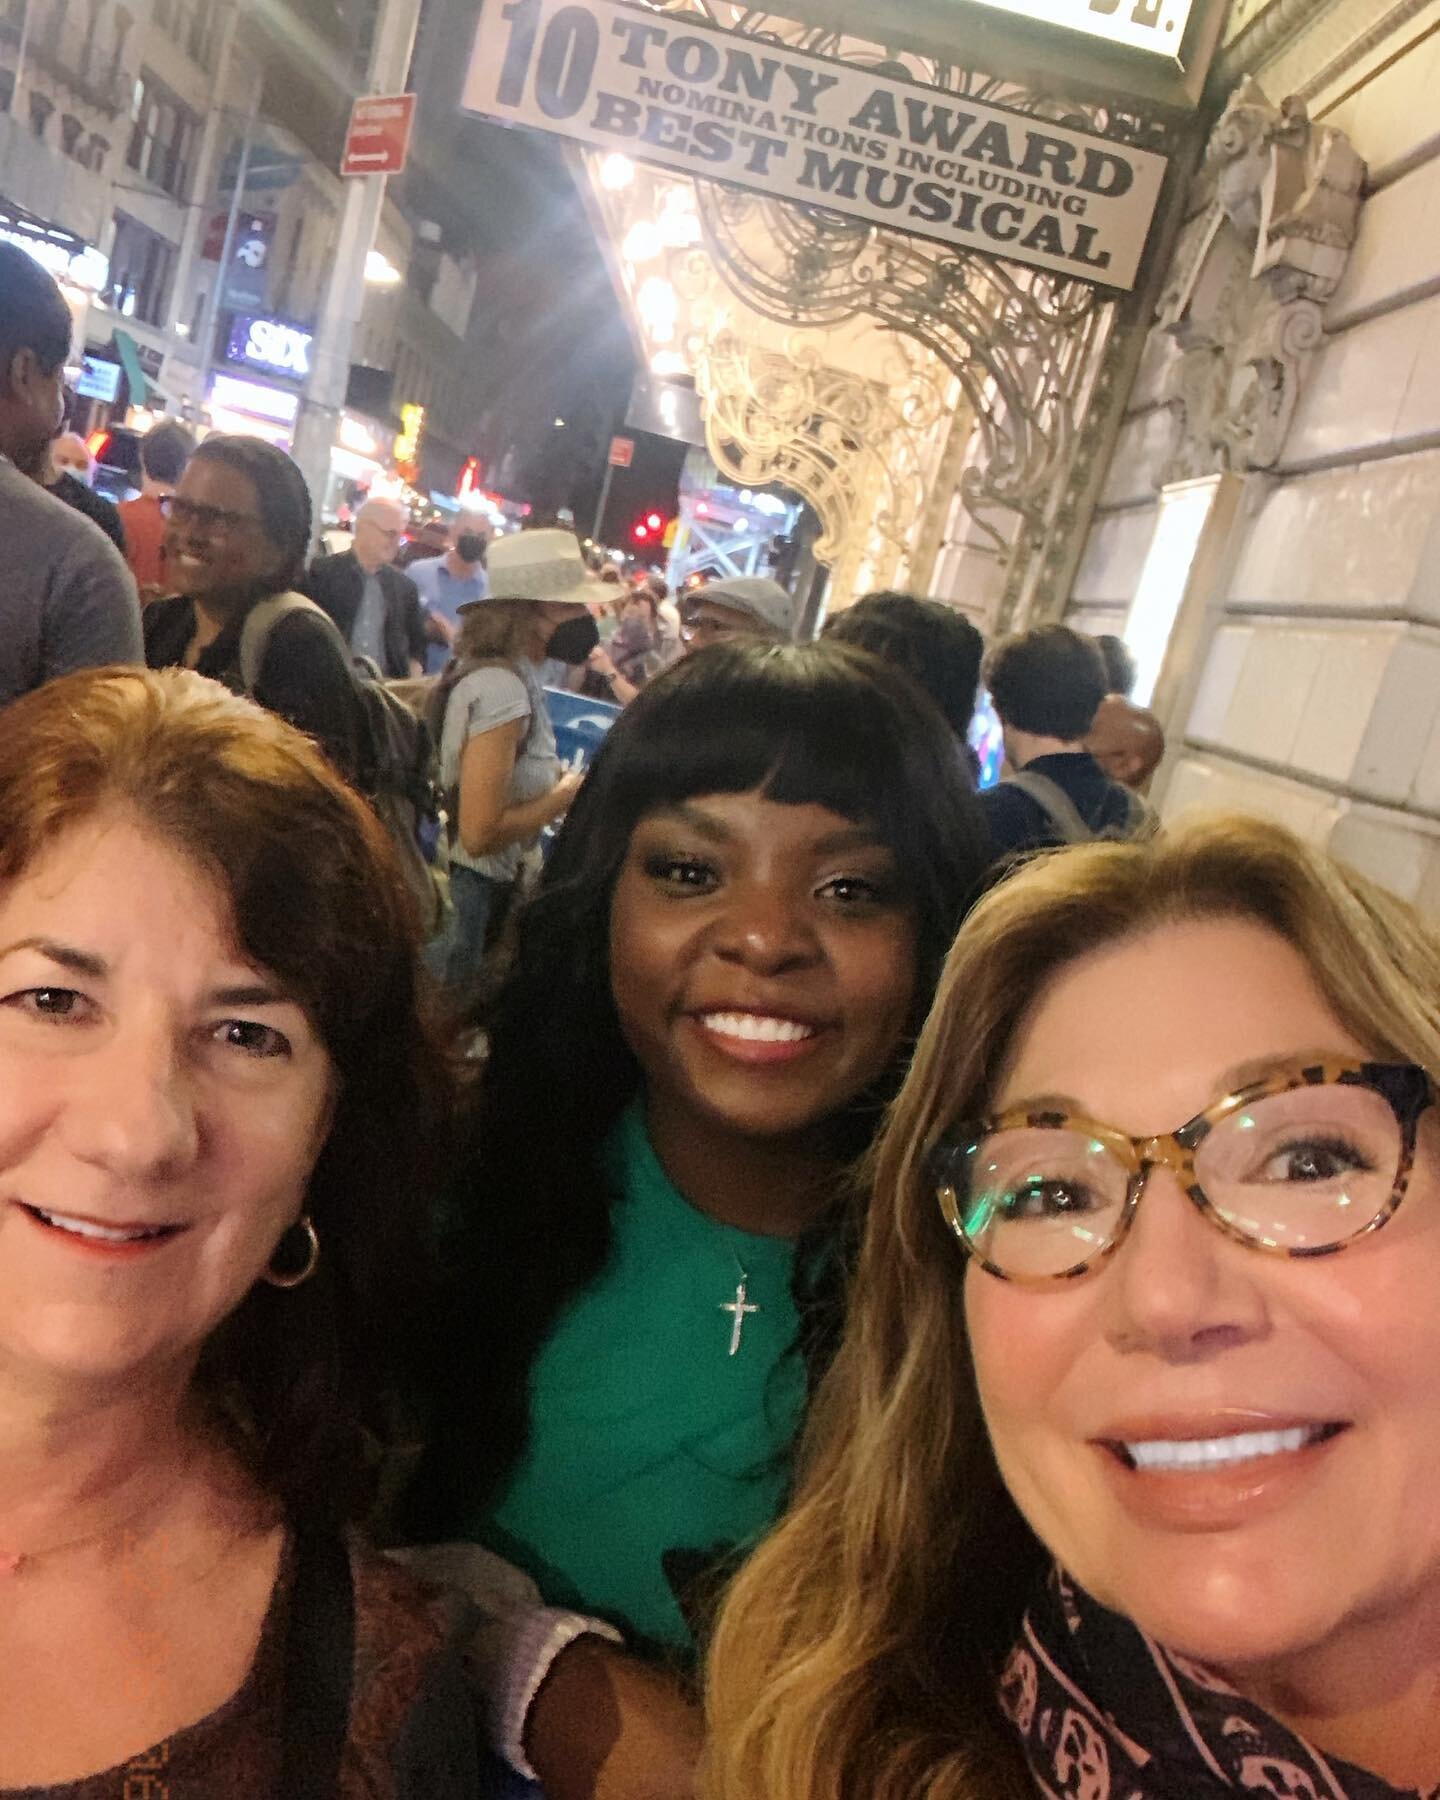 Broadway! 10 Tony nominations for Paradise Square including best actress: Joaquina Kalukango who not only brought down the house, she was gracious enough to pose for photos at the stage door. 

#tonyawards #broadway #actress #paradisesquare #nominati